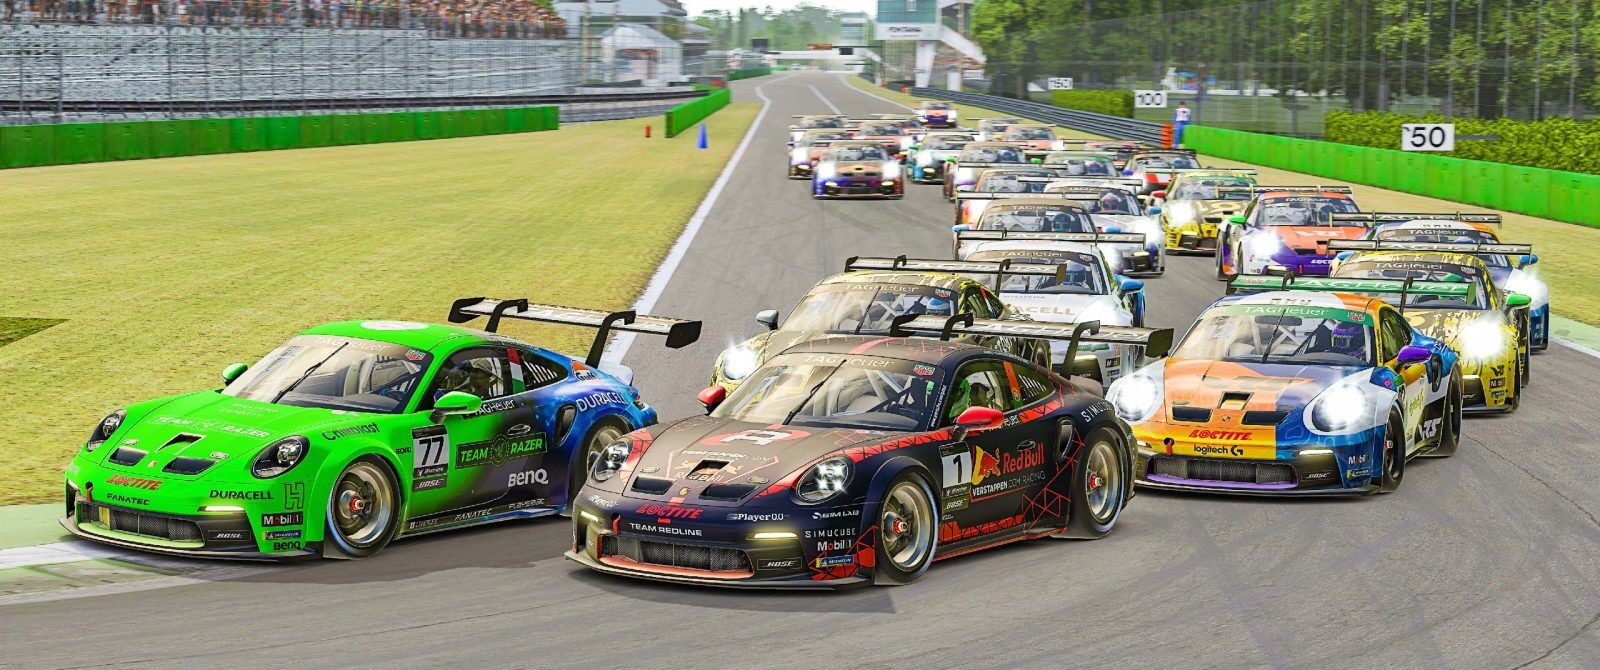 A collection of Porsche Cup cars navigating a tight corner on a racetrack.